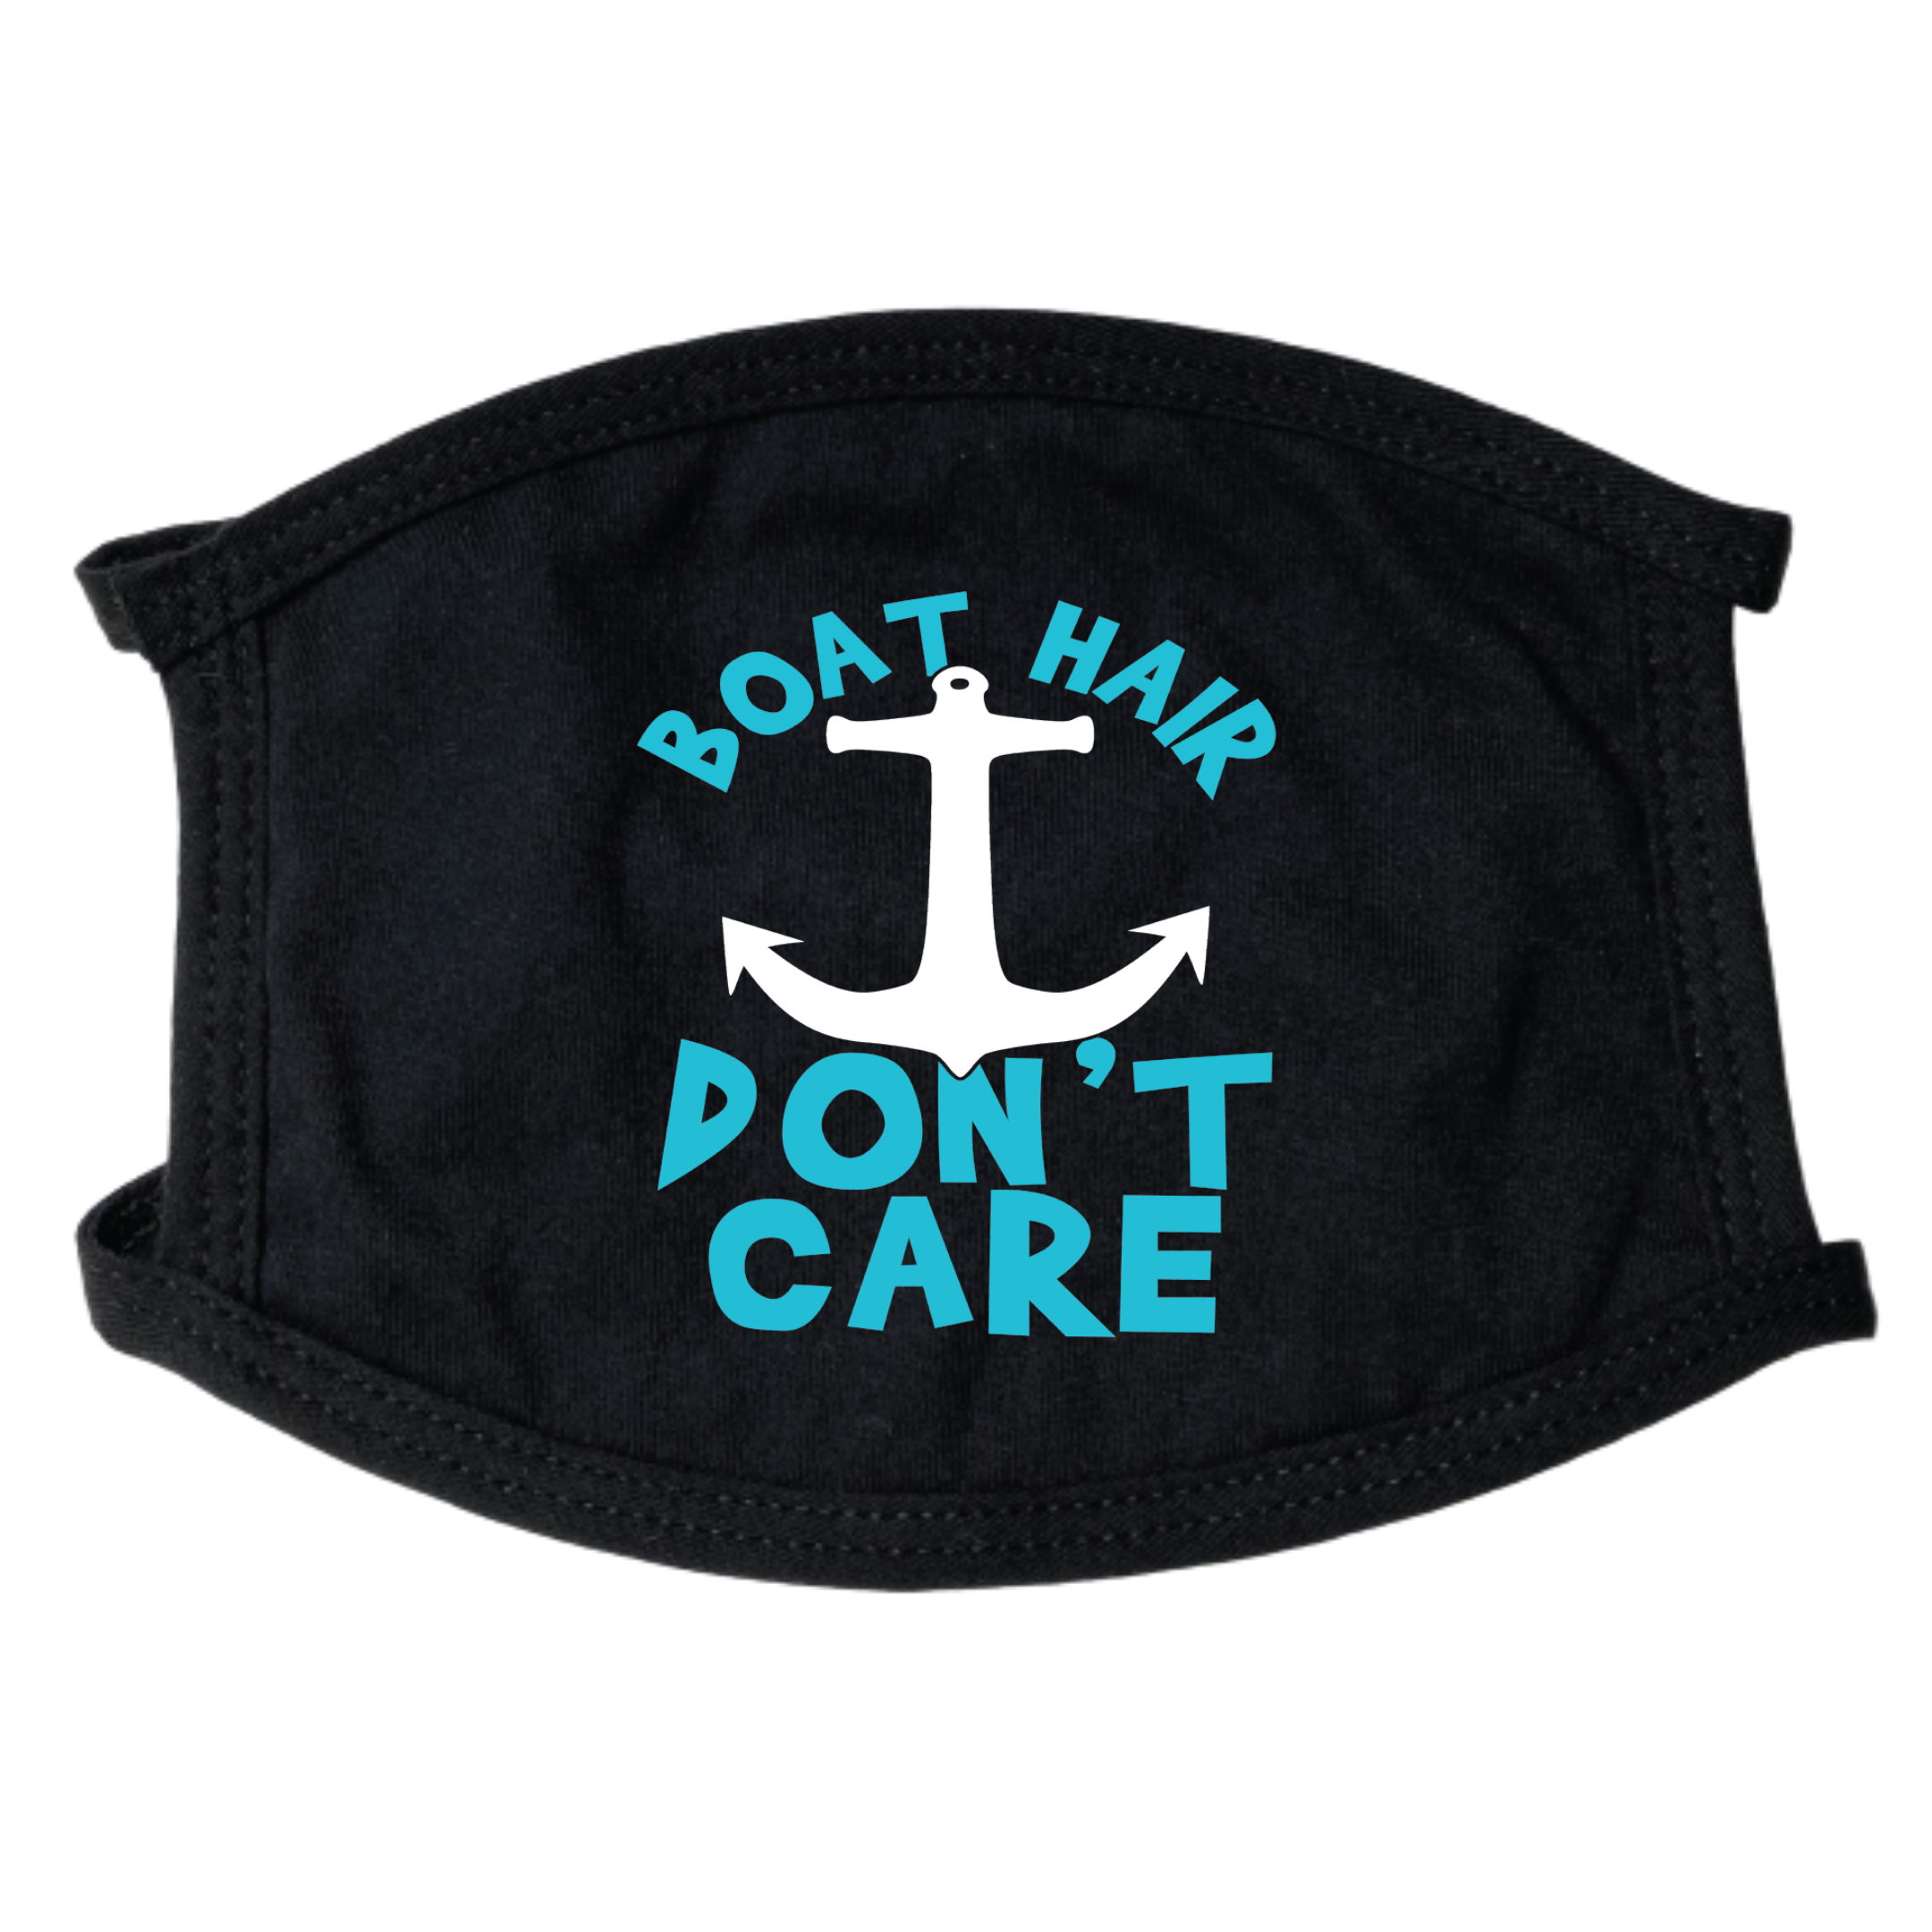 Boat Hair Don't Care Face Mask - Find Epic Store